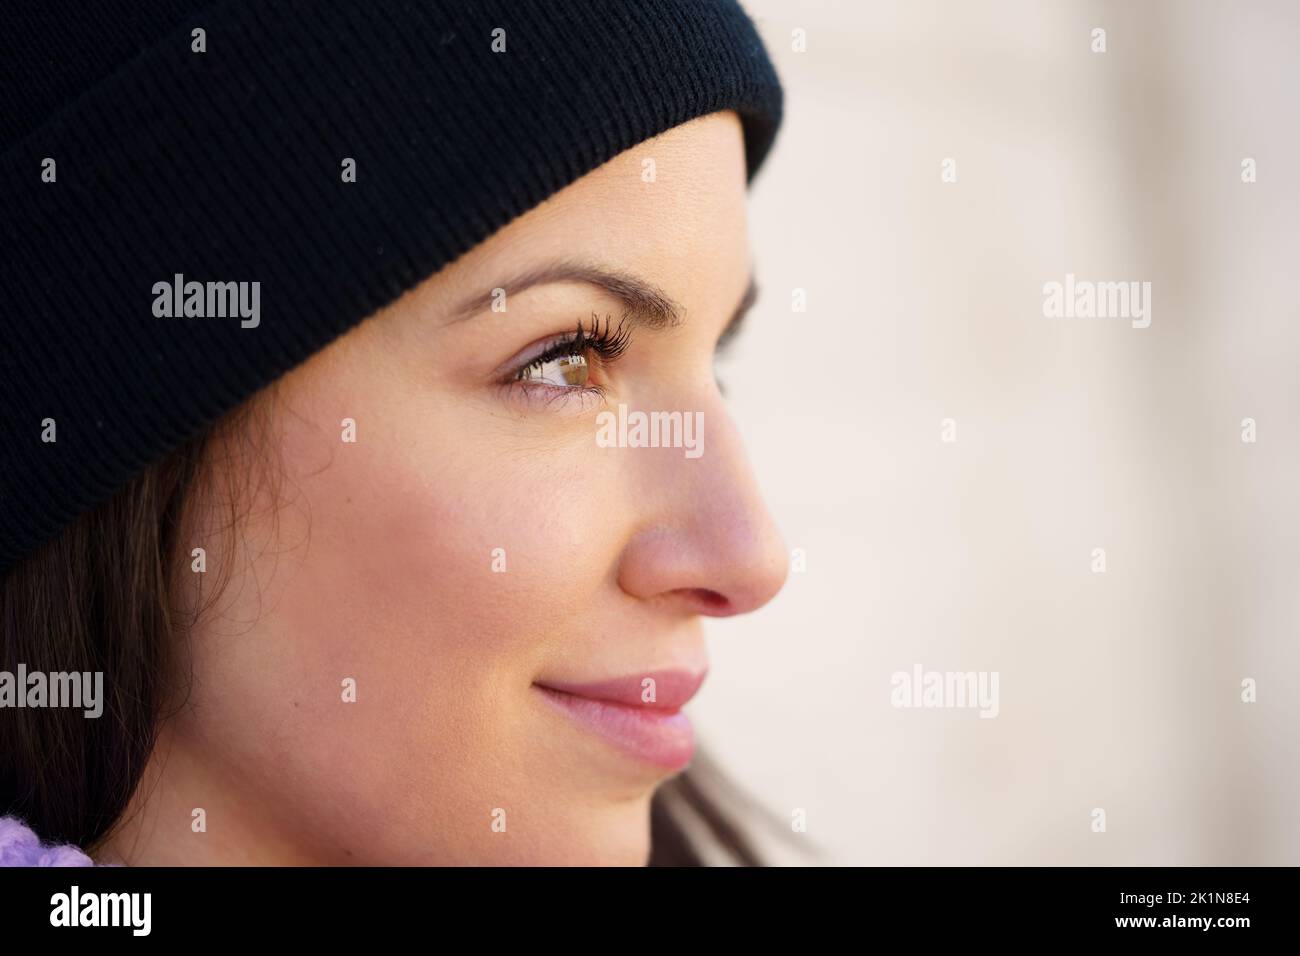 Closed portrait of young woman leaning against a wall outdoors with eyes of hope and joy. Stock Photo